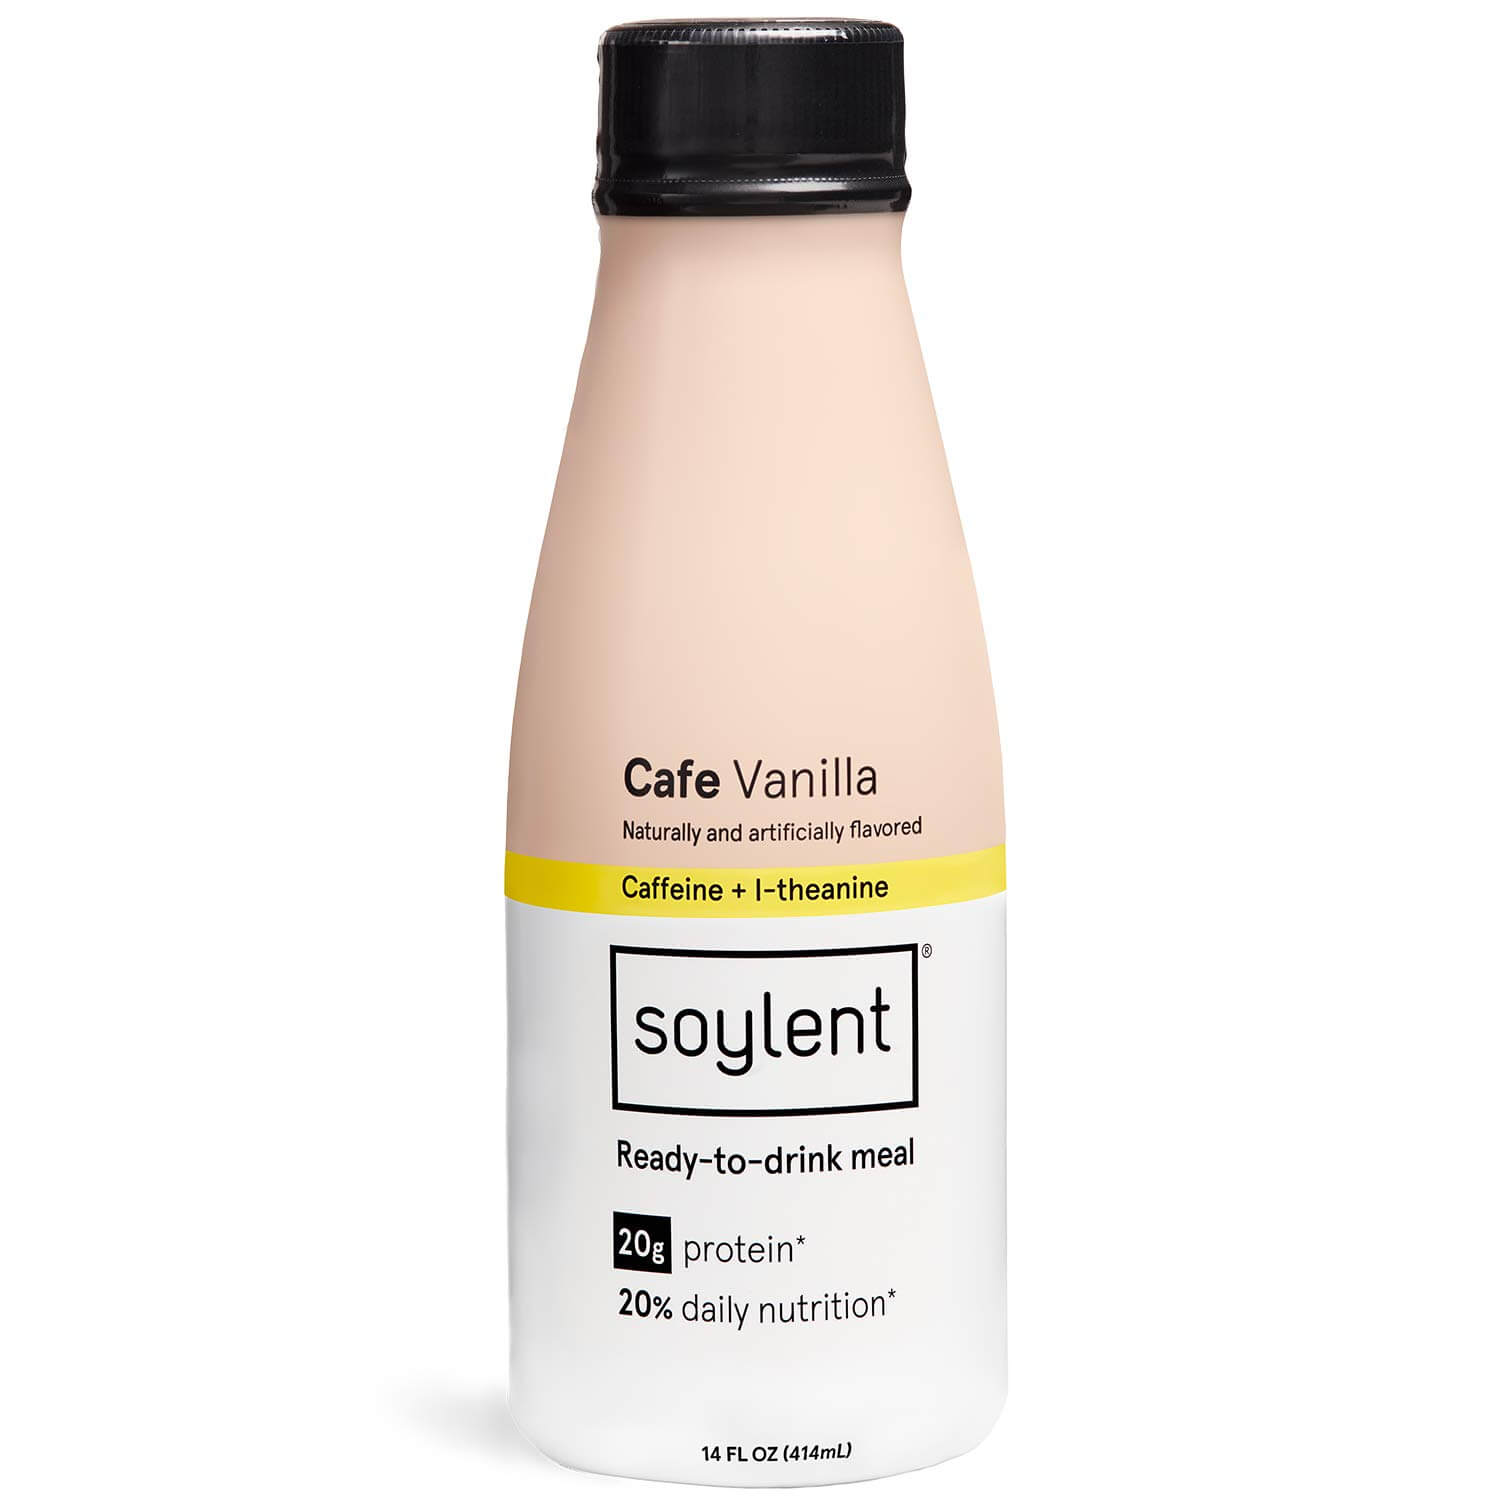 Soylent Cafe Vanilla flavor Meal Replacement Review